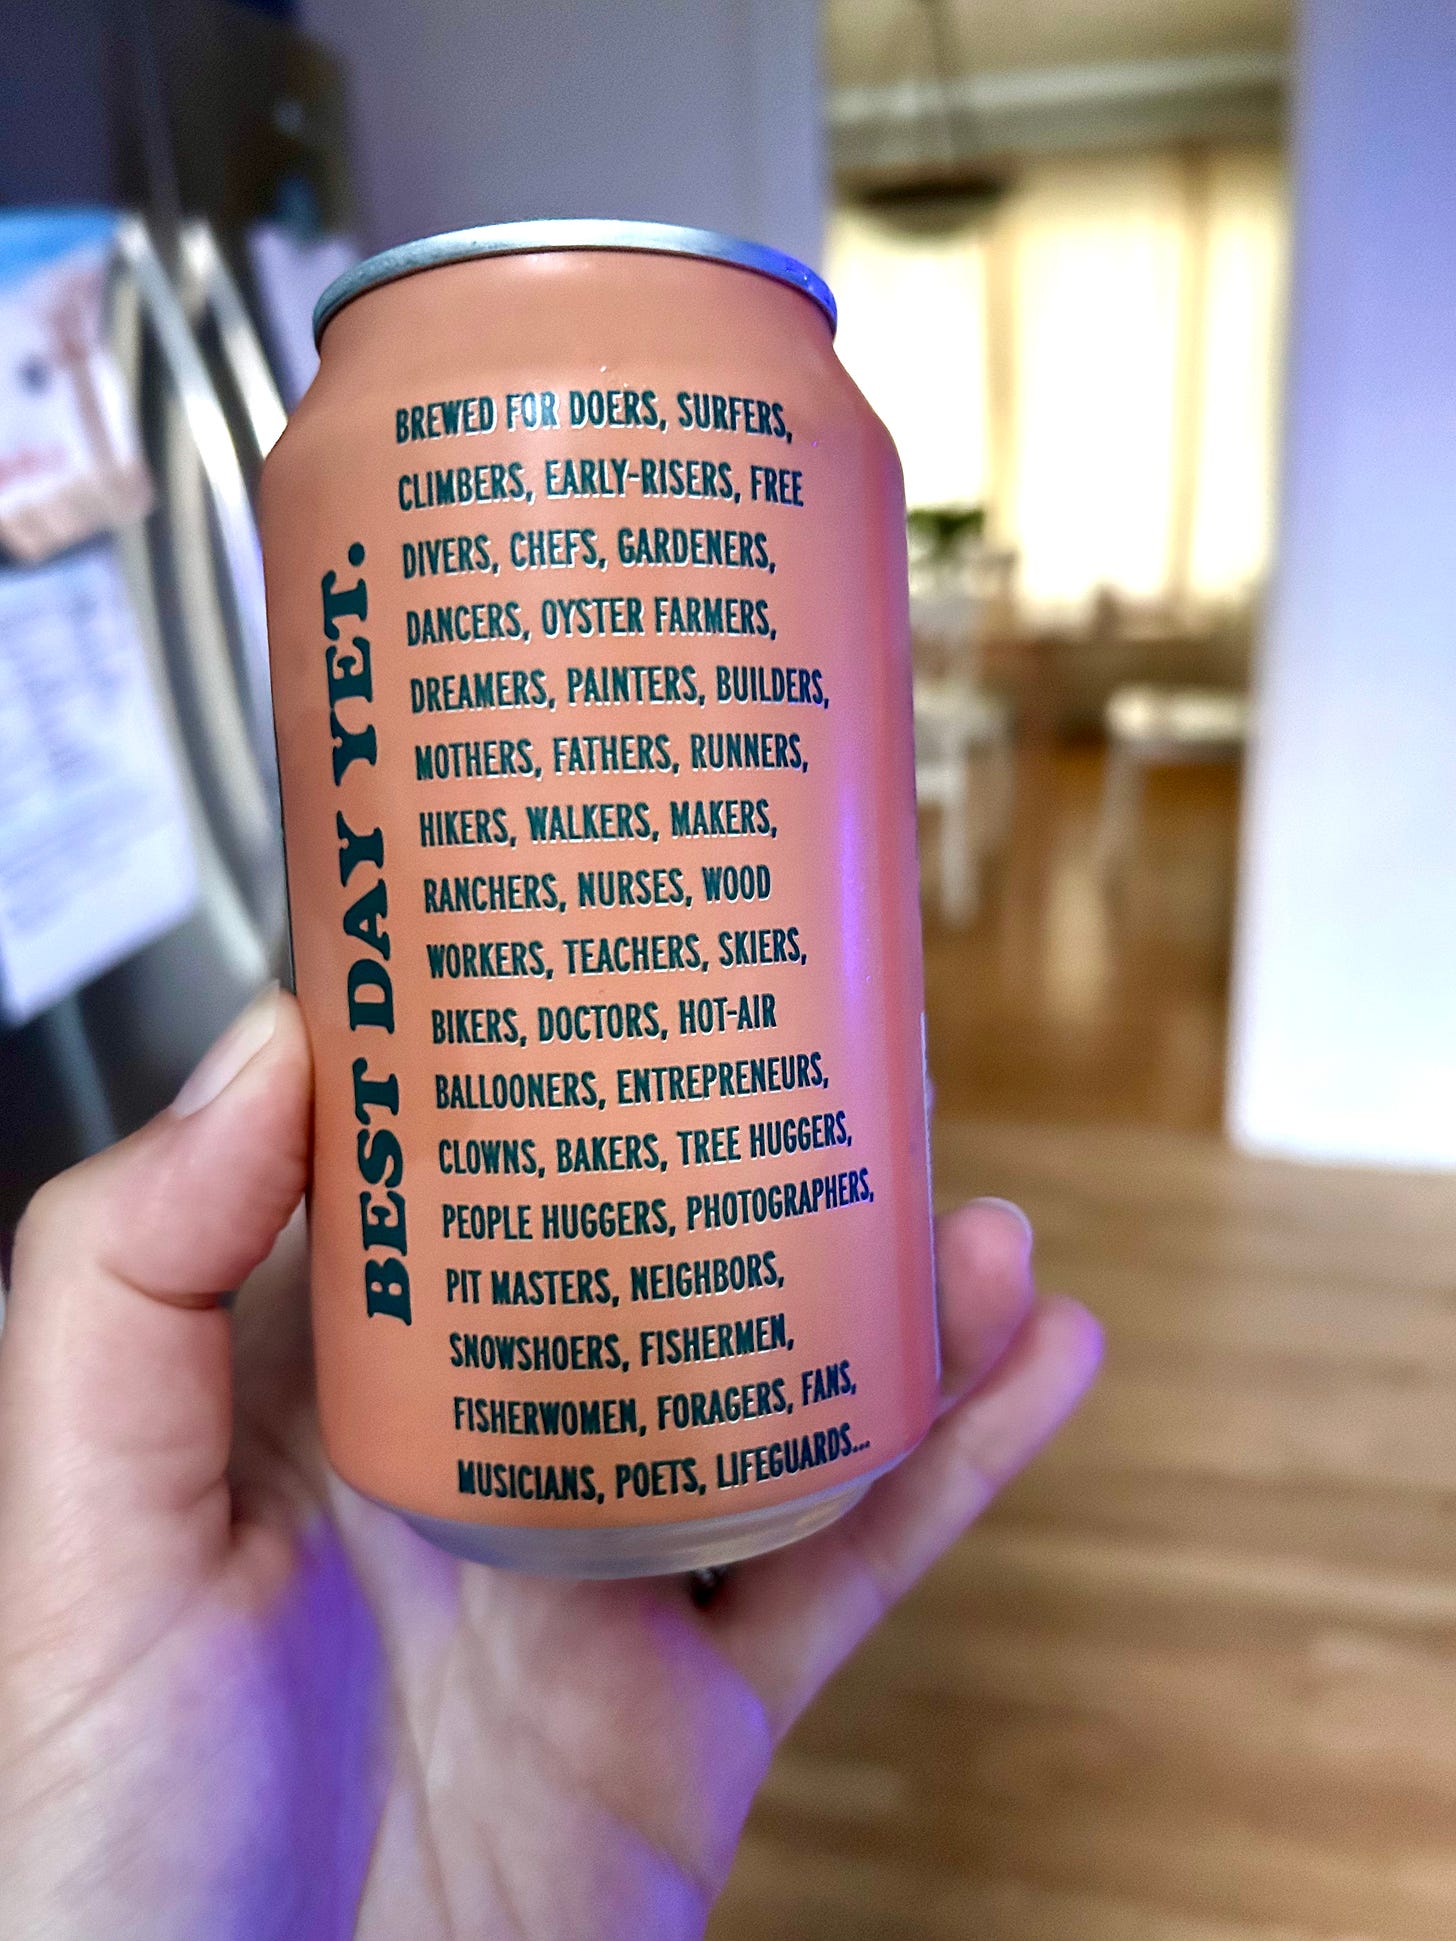 Image shows a hand holding a can of Best Day Brewing’s Kölsch-style beer with the back of the can showing. The can says “Best day yet,” followed by “Brewed for doers, surfers, climbers, early-risers, free divers, chefs, gardeners, dancers, oyster farmers, dreamers, painters, builders, mothers, fathers, runners, hikers, walkers, makers, ranchers, nurses, wood workers, teachers, skiers, bikers, doctors, hot-air ballooners, entrepreneurs, clowns, bakers, tree huggers, people huggers, photographers, pit masters, neighbors, snowshoers, fishermen, fisherwomen, foragers, fans, musicians, poets, lifeguards…”